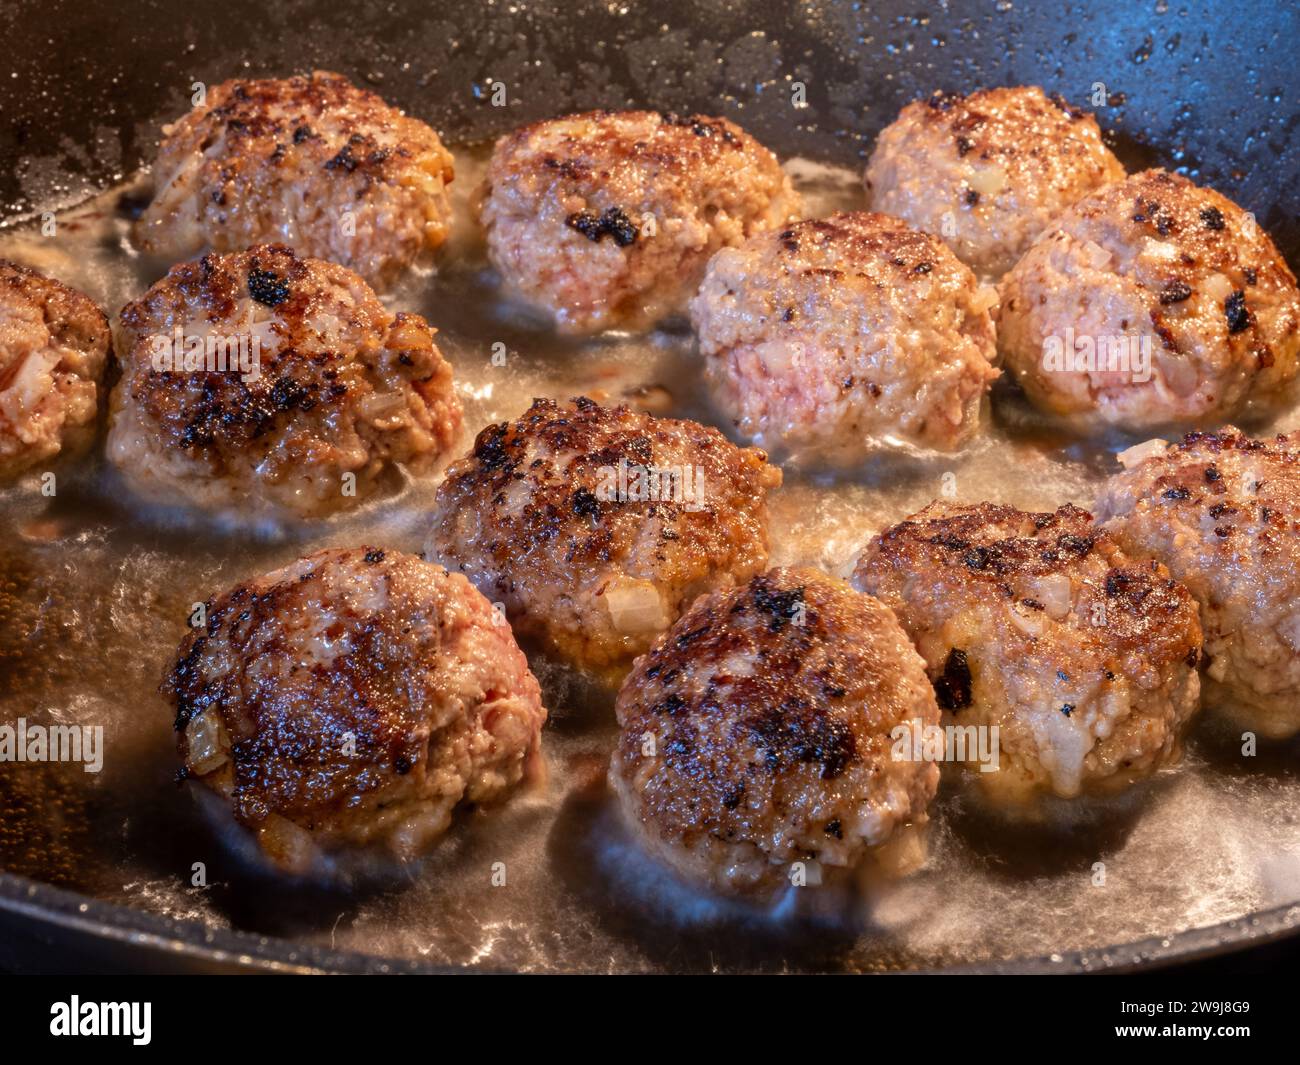 A focused perspective capturing sizzling golden-brown meatballs searing in bubbling butter within a frying pan. Stock Photo